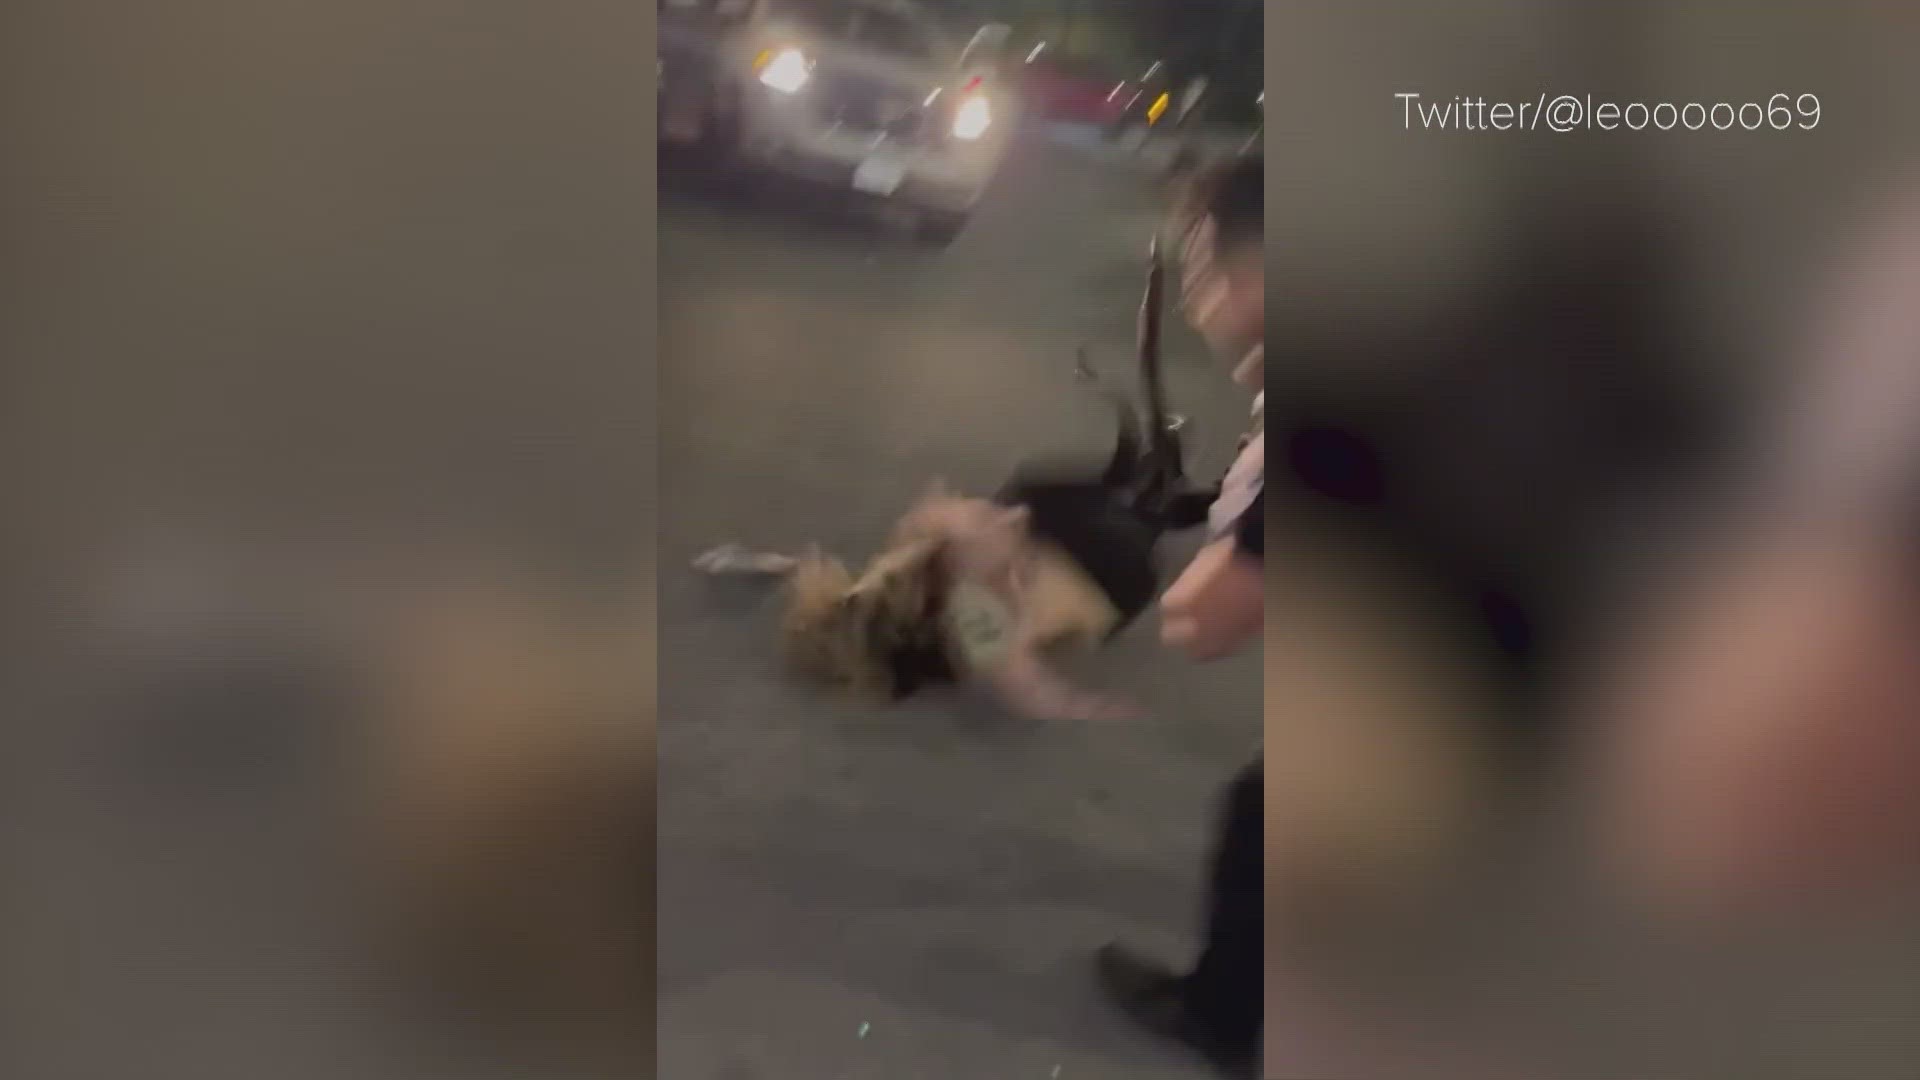 San Antonio brawl Video shows security slamming woman to ground kens5 pic picture